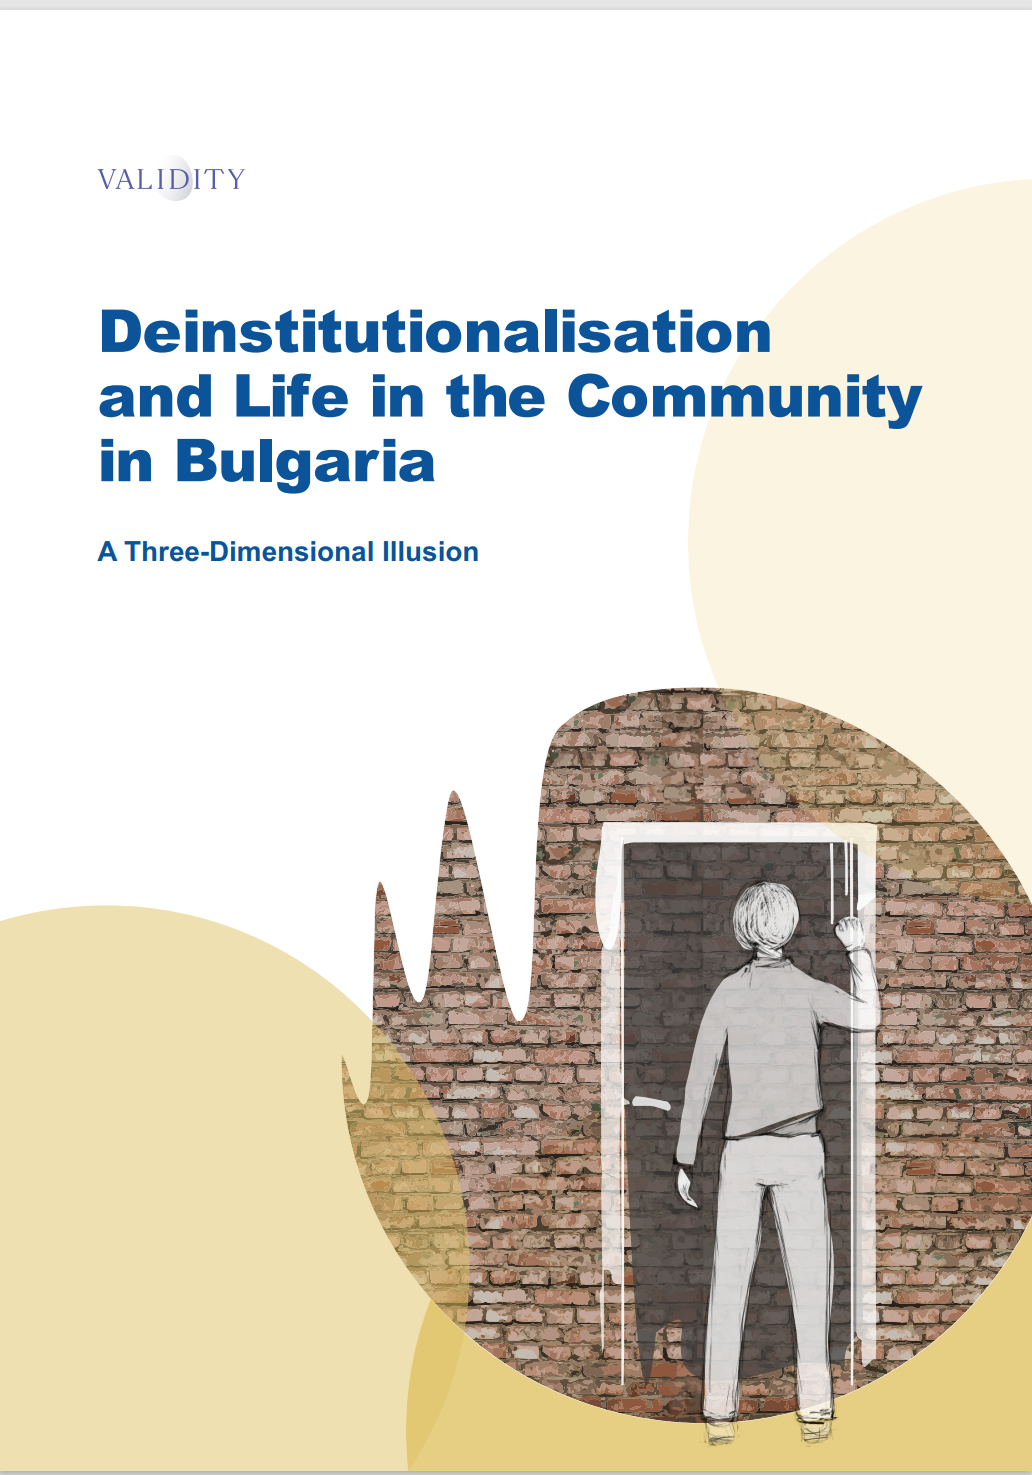 Cover art for: Deinstitutionalisation and Life in the Community in Bulgaria: A Three-Dimensional Illusion